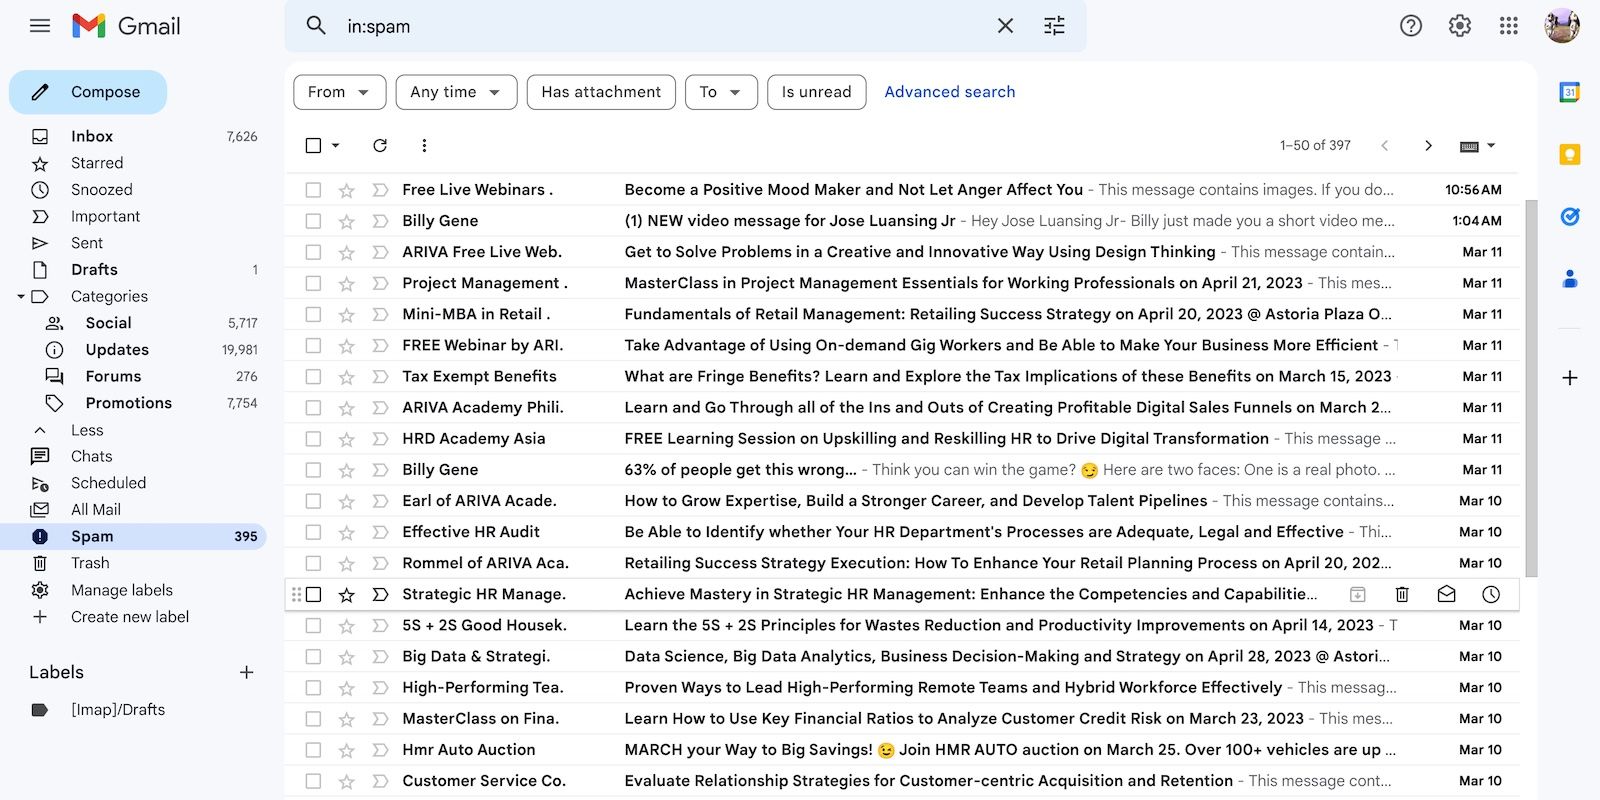 The Spam Mail in Gmail